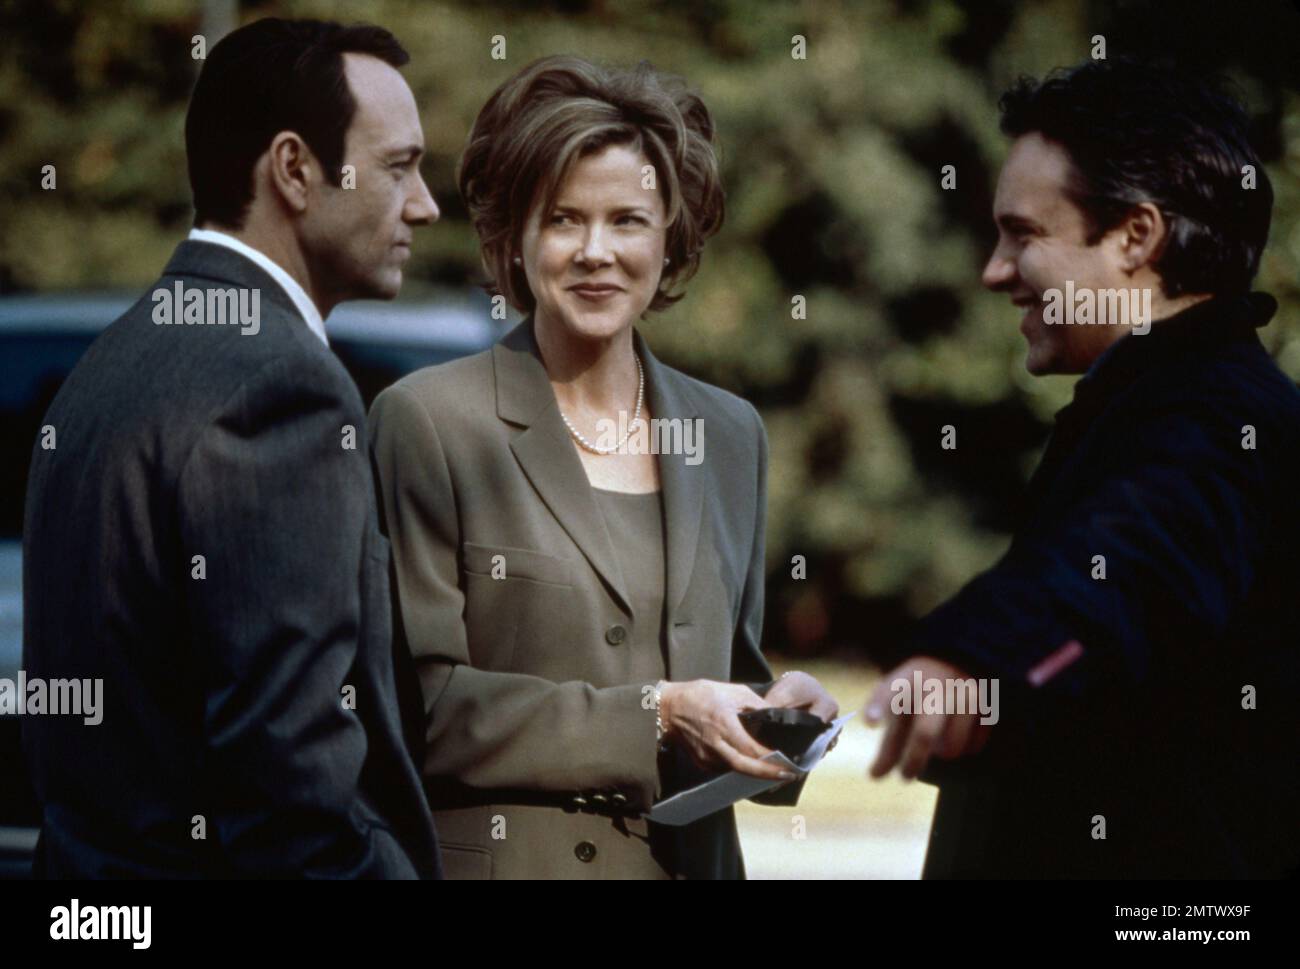 American Beauty Year : 1999 USA Regisseur : Sam Mendes Kevin Spacey, Annette Bening, Sam Mendes Shooting Picting Picture Stockfoto